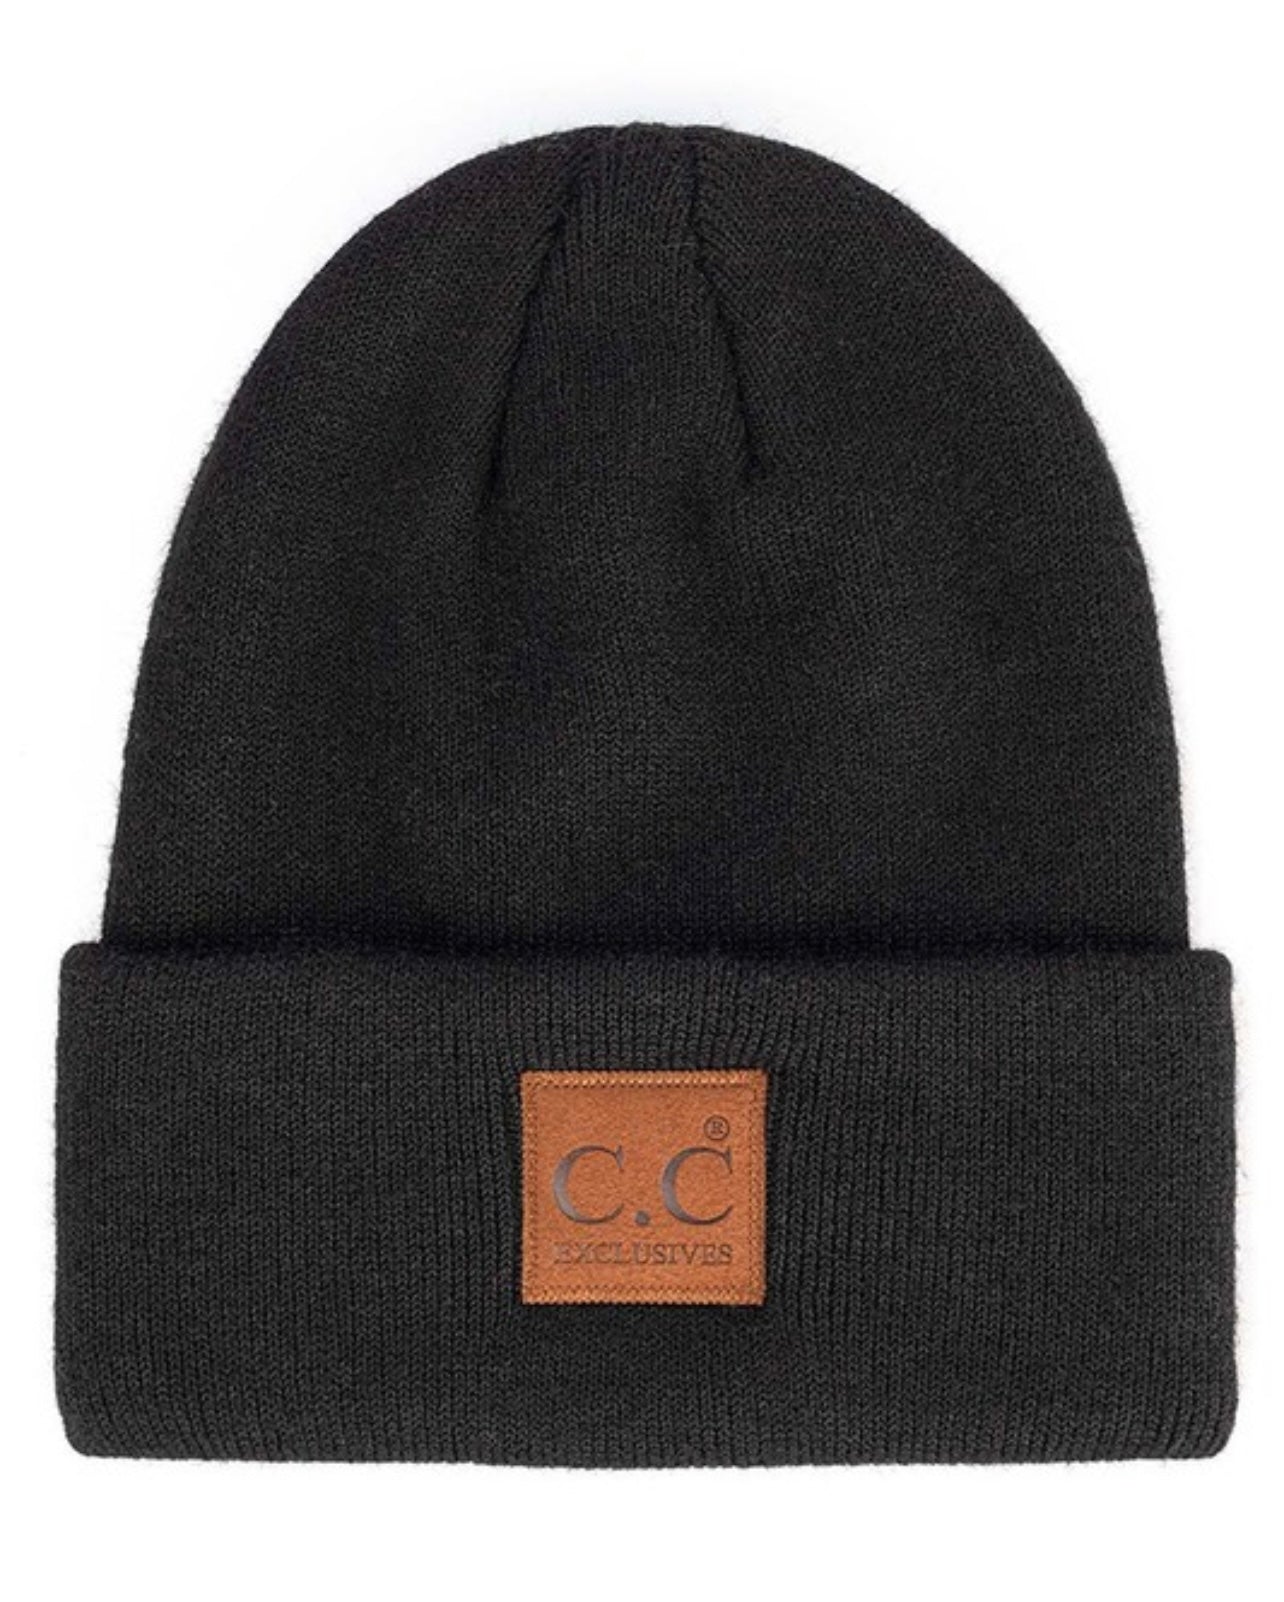 Beanie with Suede Patch - Black